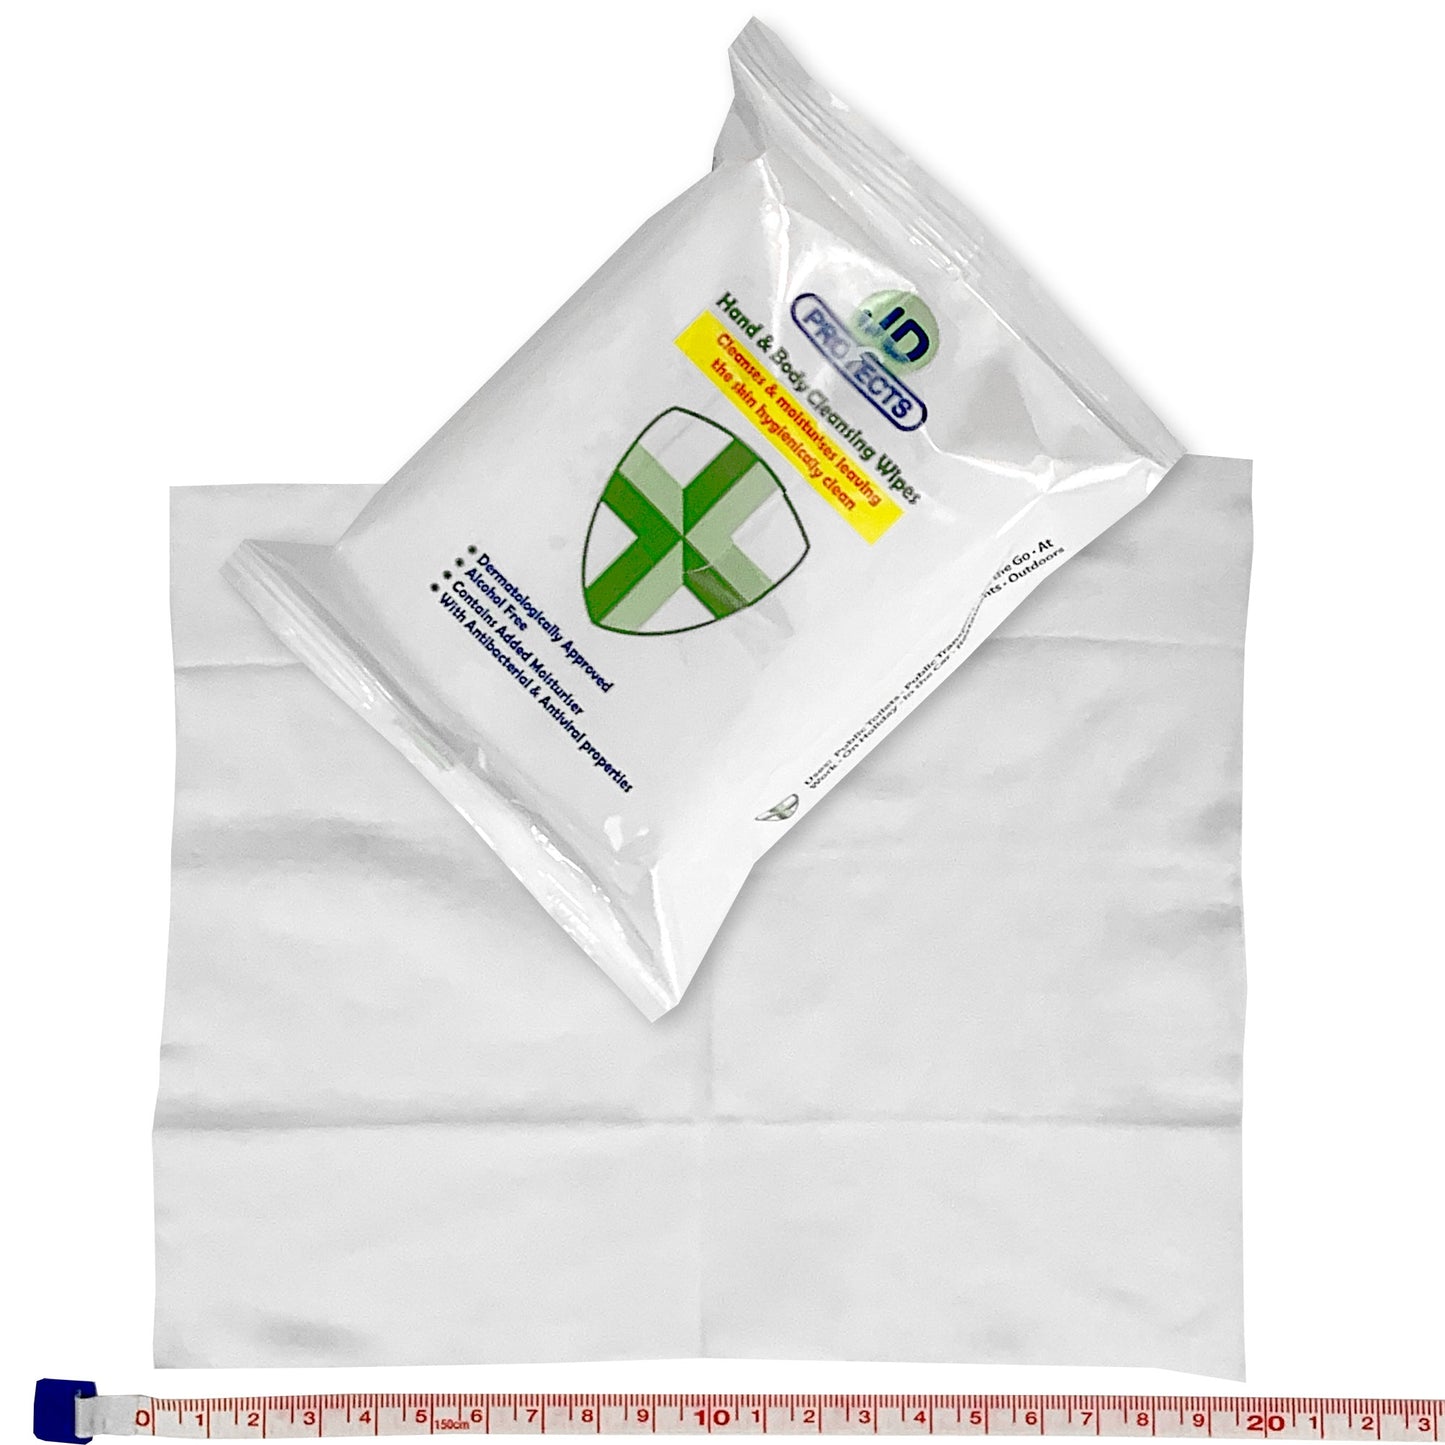 JD Protects Anti Viral Hand Sanitising Wipes (20 wipes)